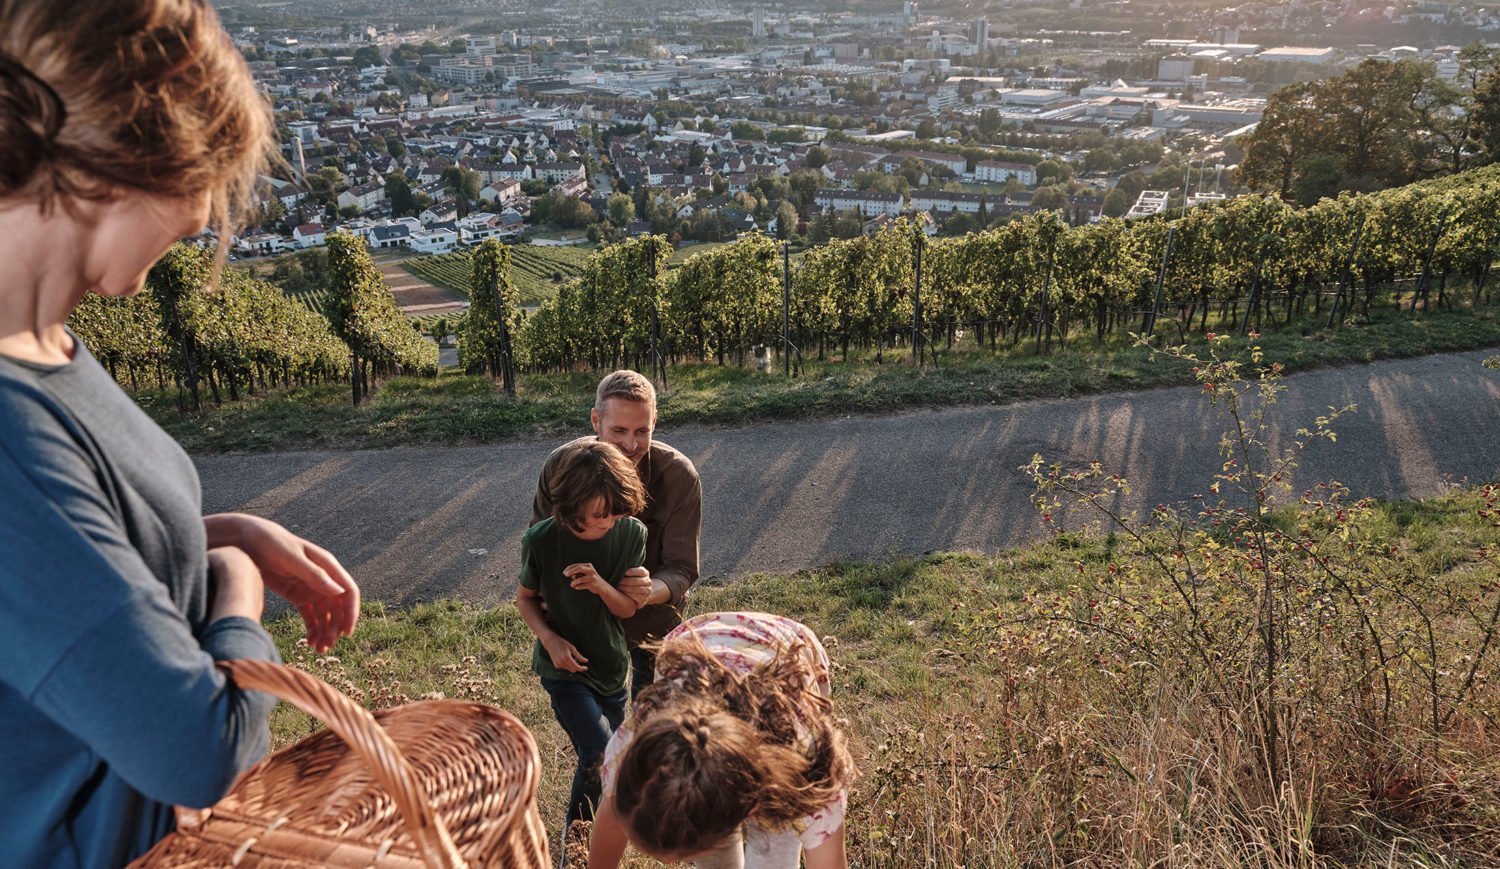 The wine panorama path leads above the city through the vineyards